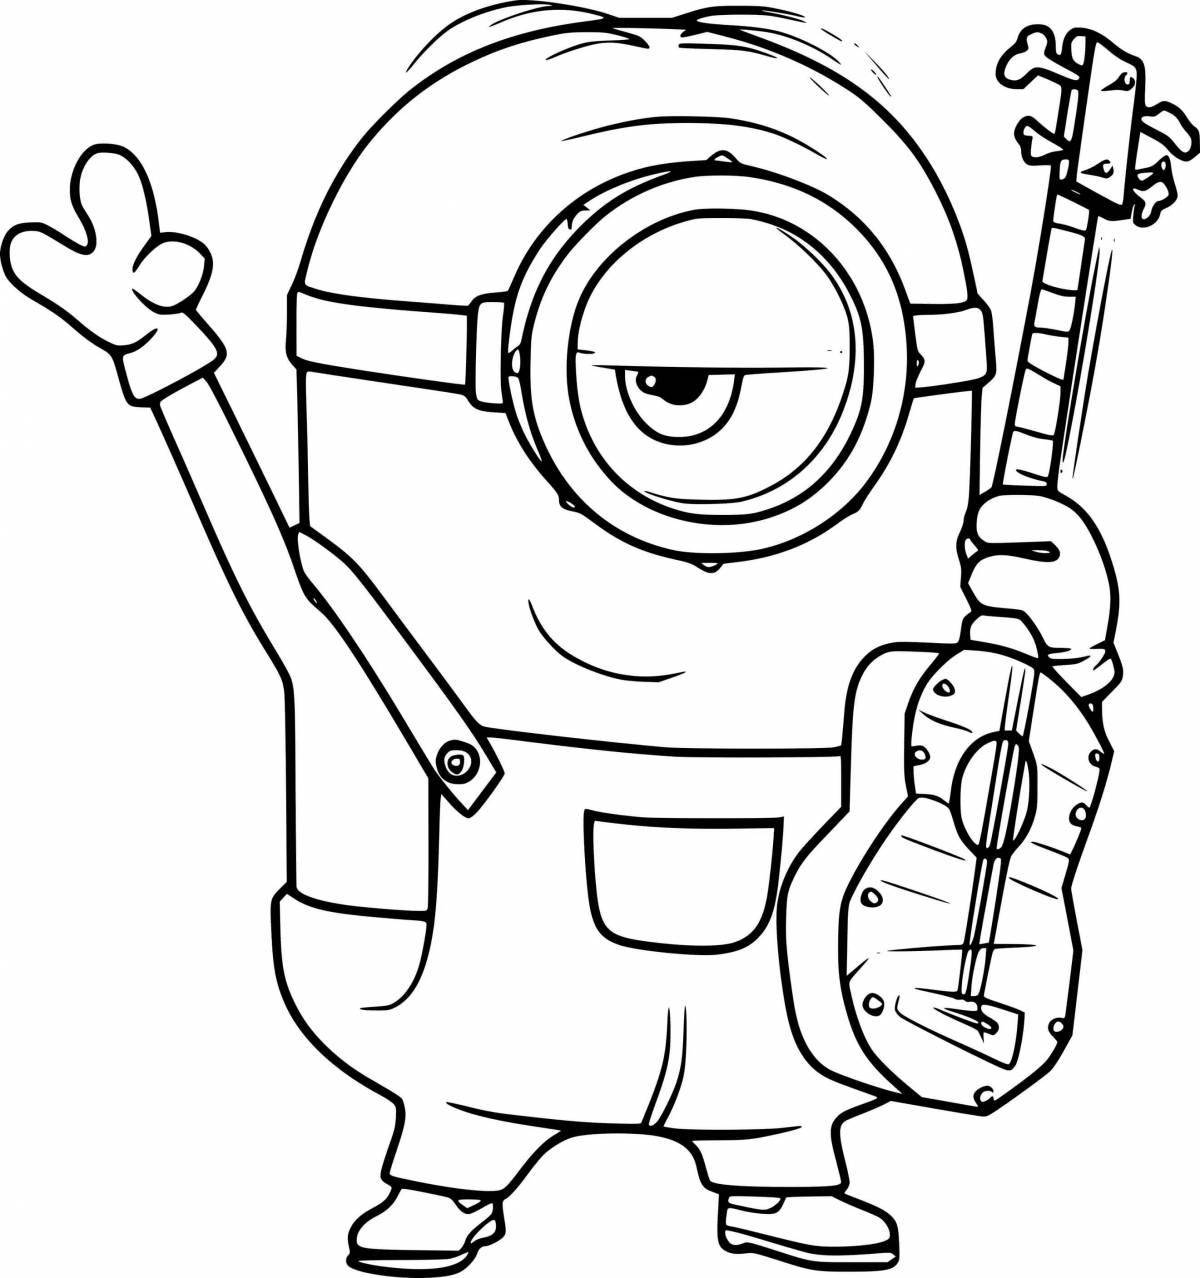 Outstanding kevin the minion coloring book